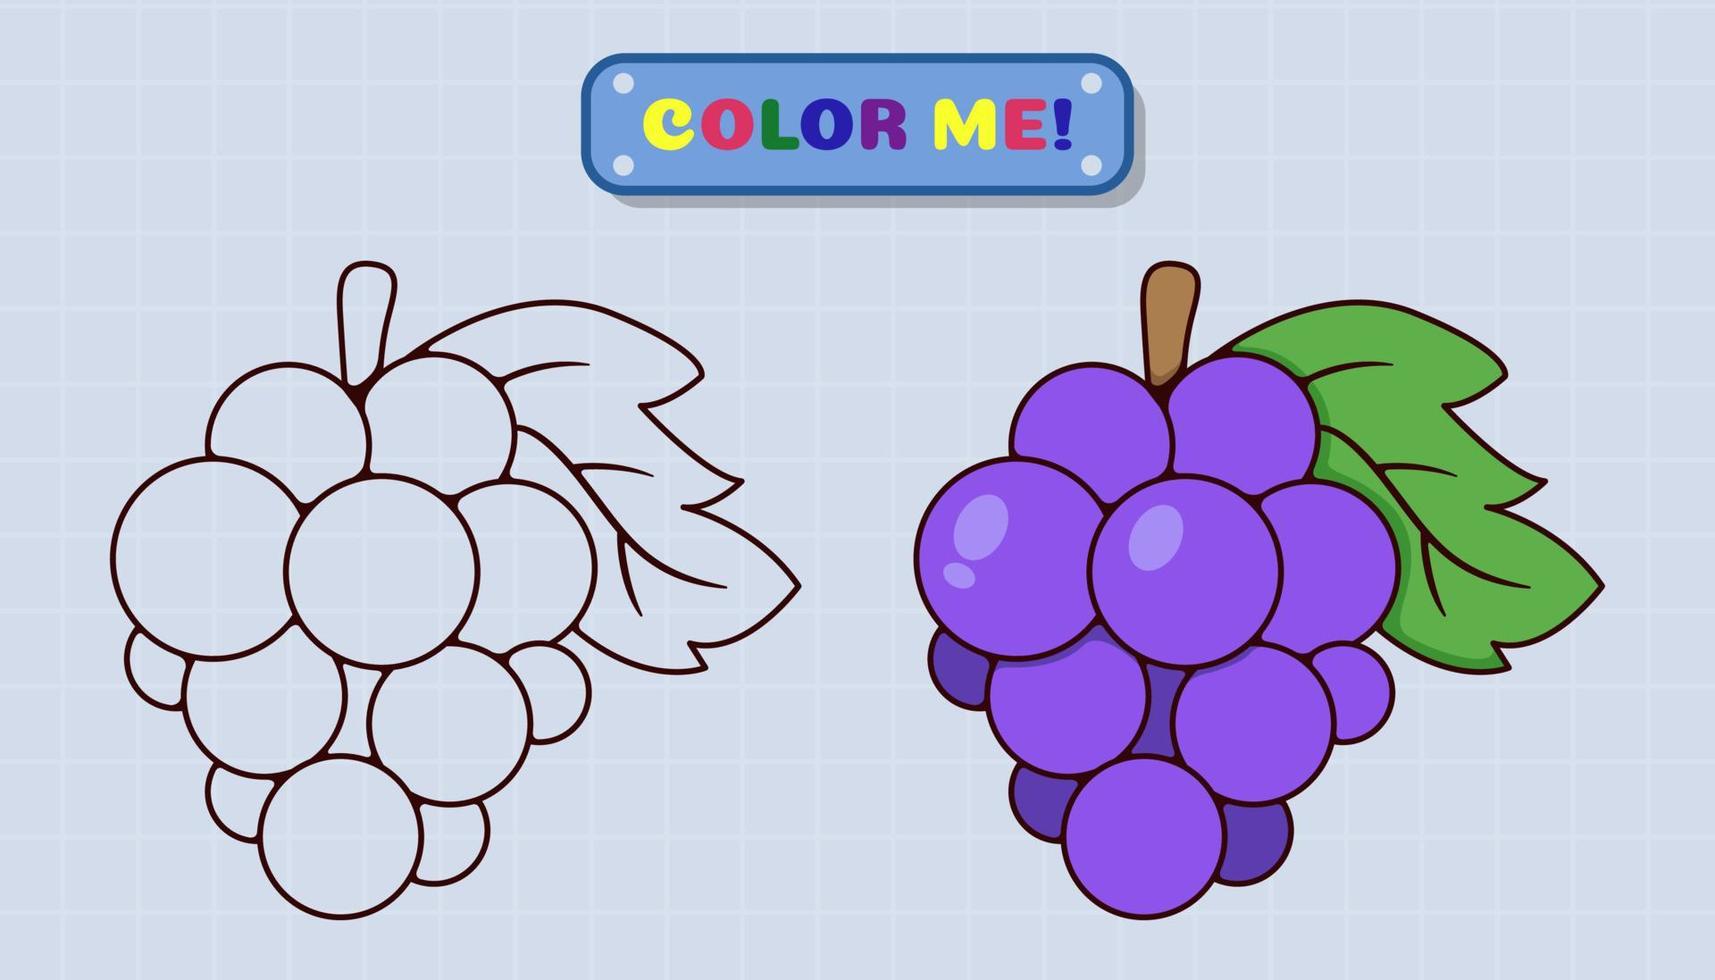 Grape coloring book page comes with sketches and color samples for children and preschool education. Cartoon Style Illustration vector